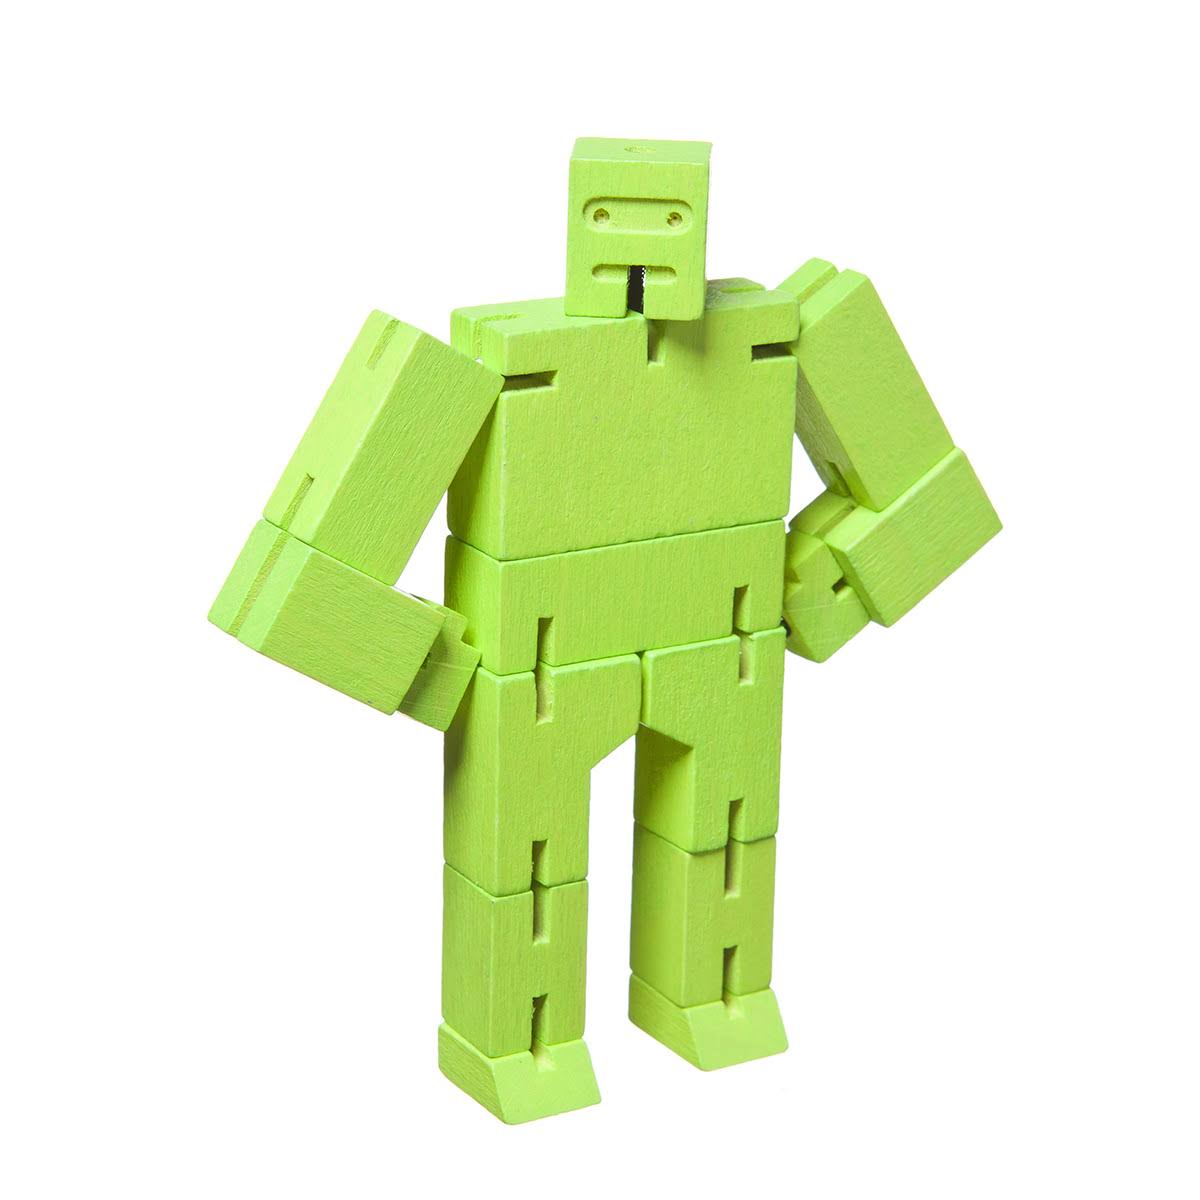 Micro Cubebot Brain Teaser Puzzle - Lime Green